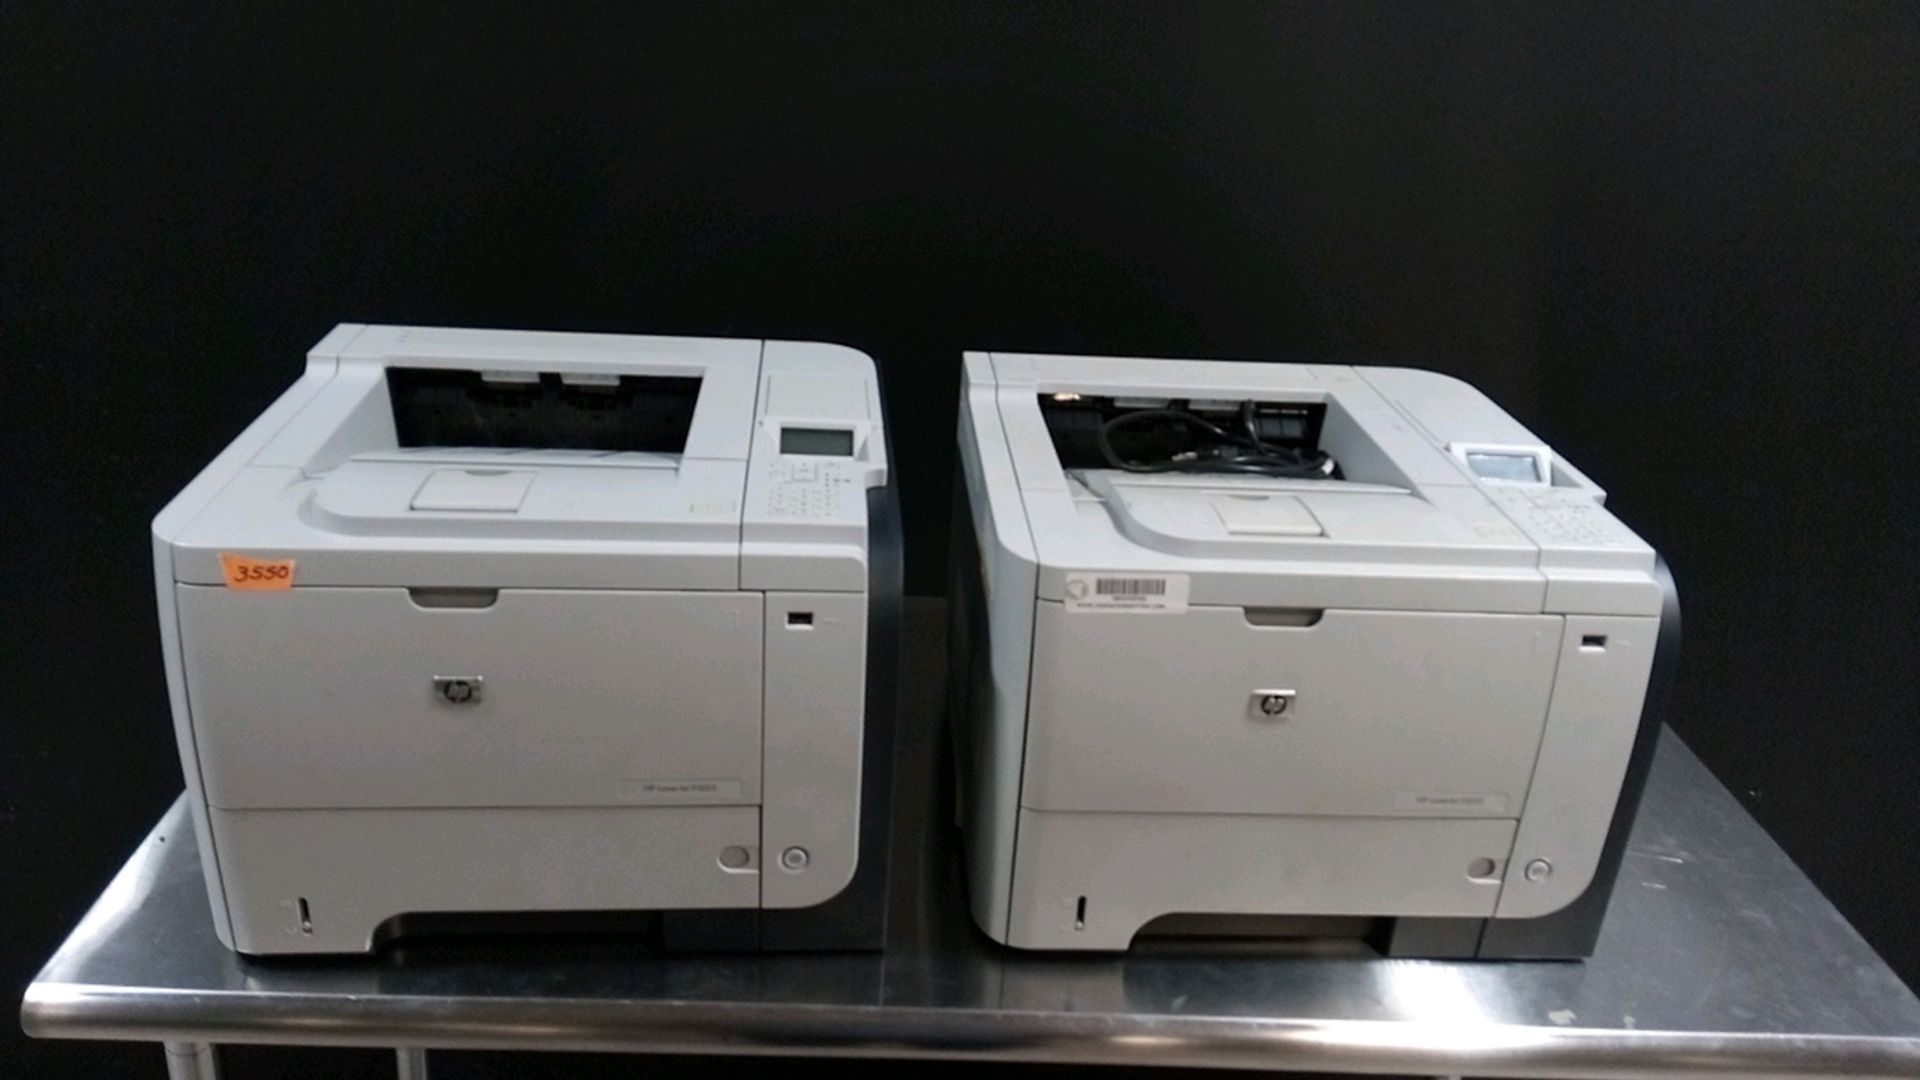 LOT OF 2 HP P3015 PRINTERS LOCATED AT: 2440 GREENLEAF AVE, ELK GROVE VILLAGE IL